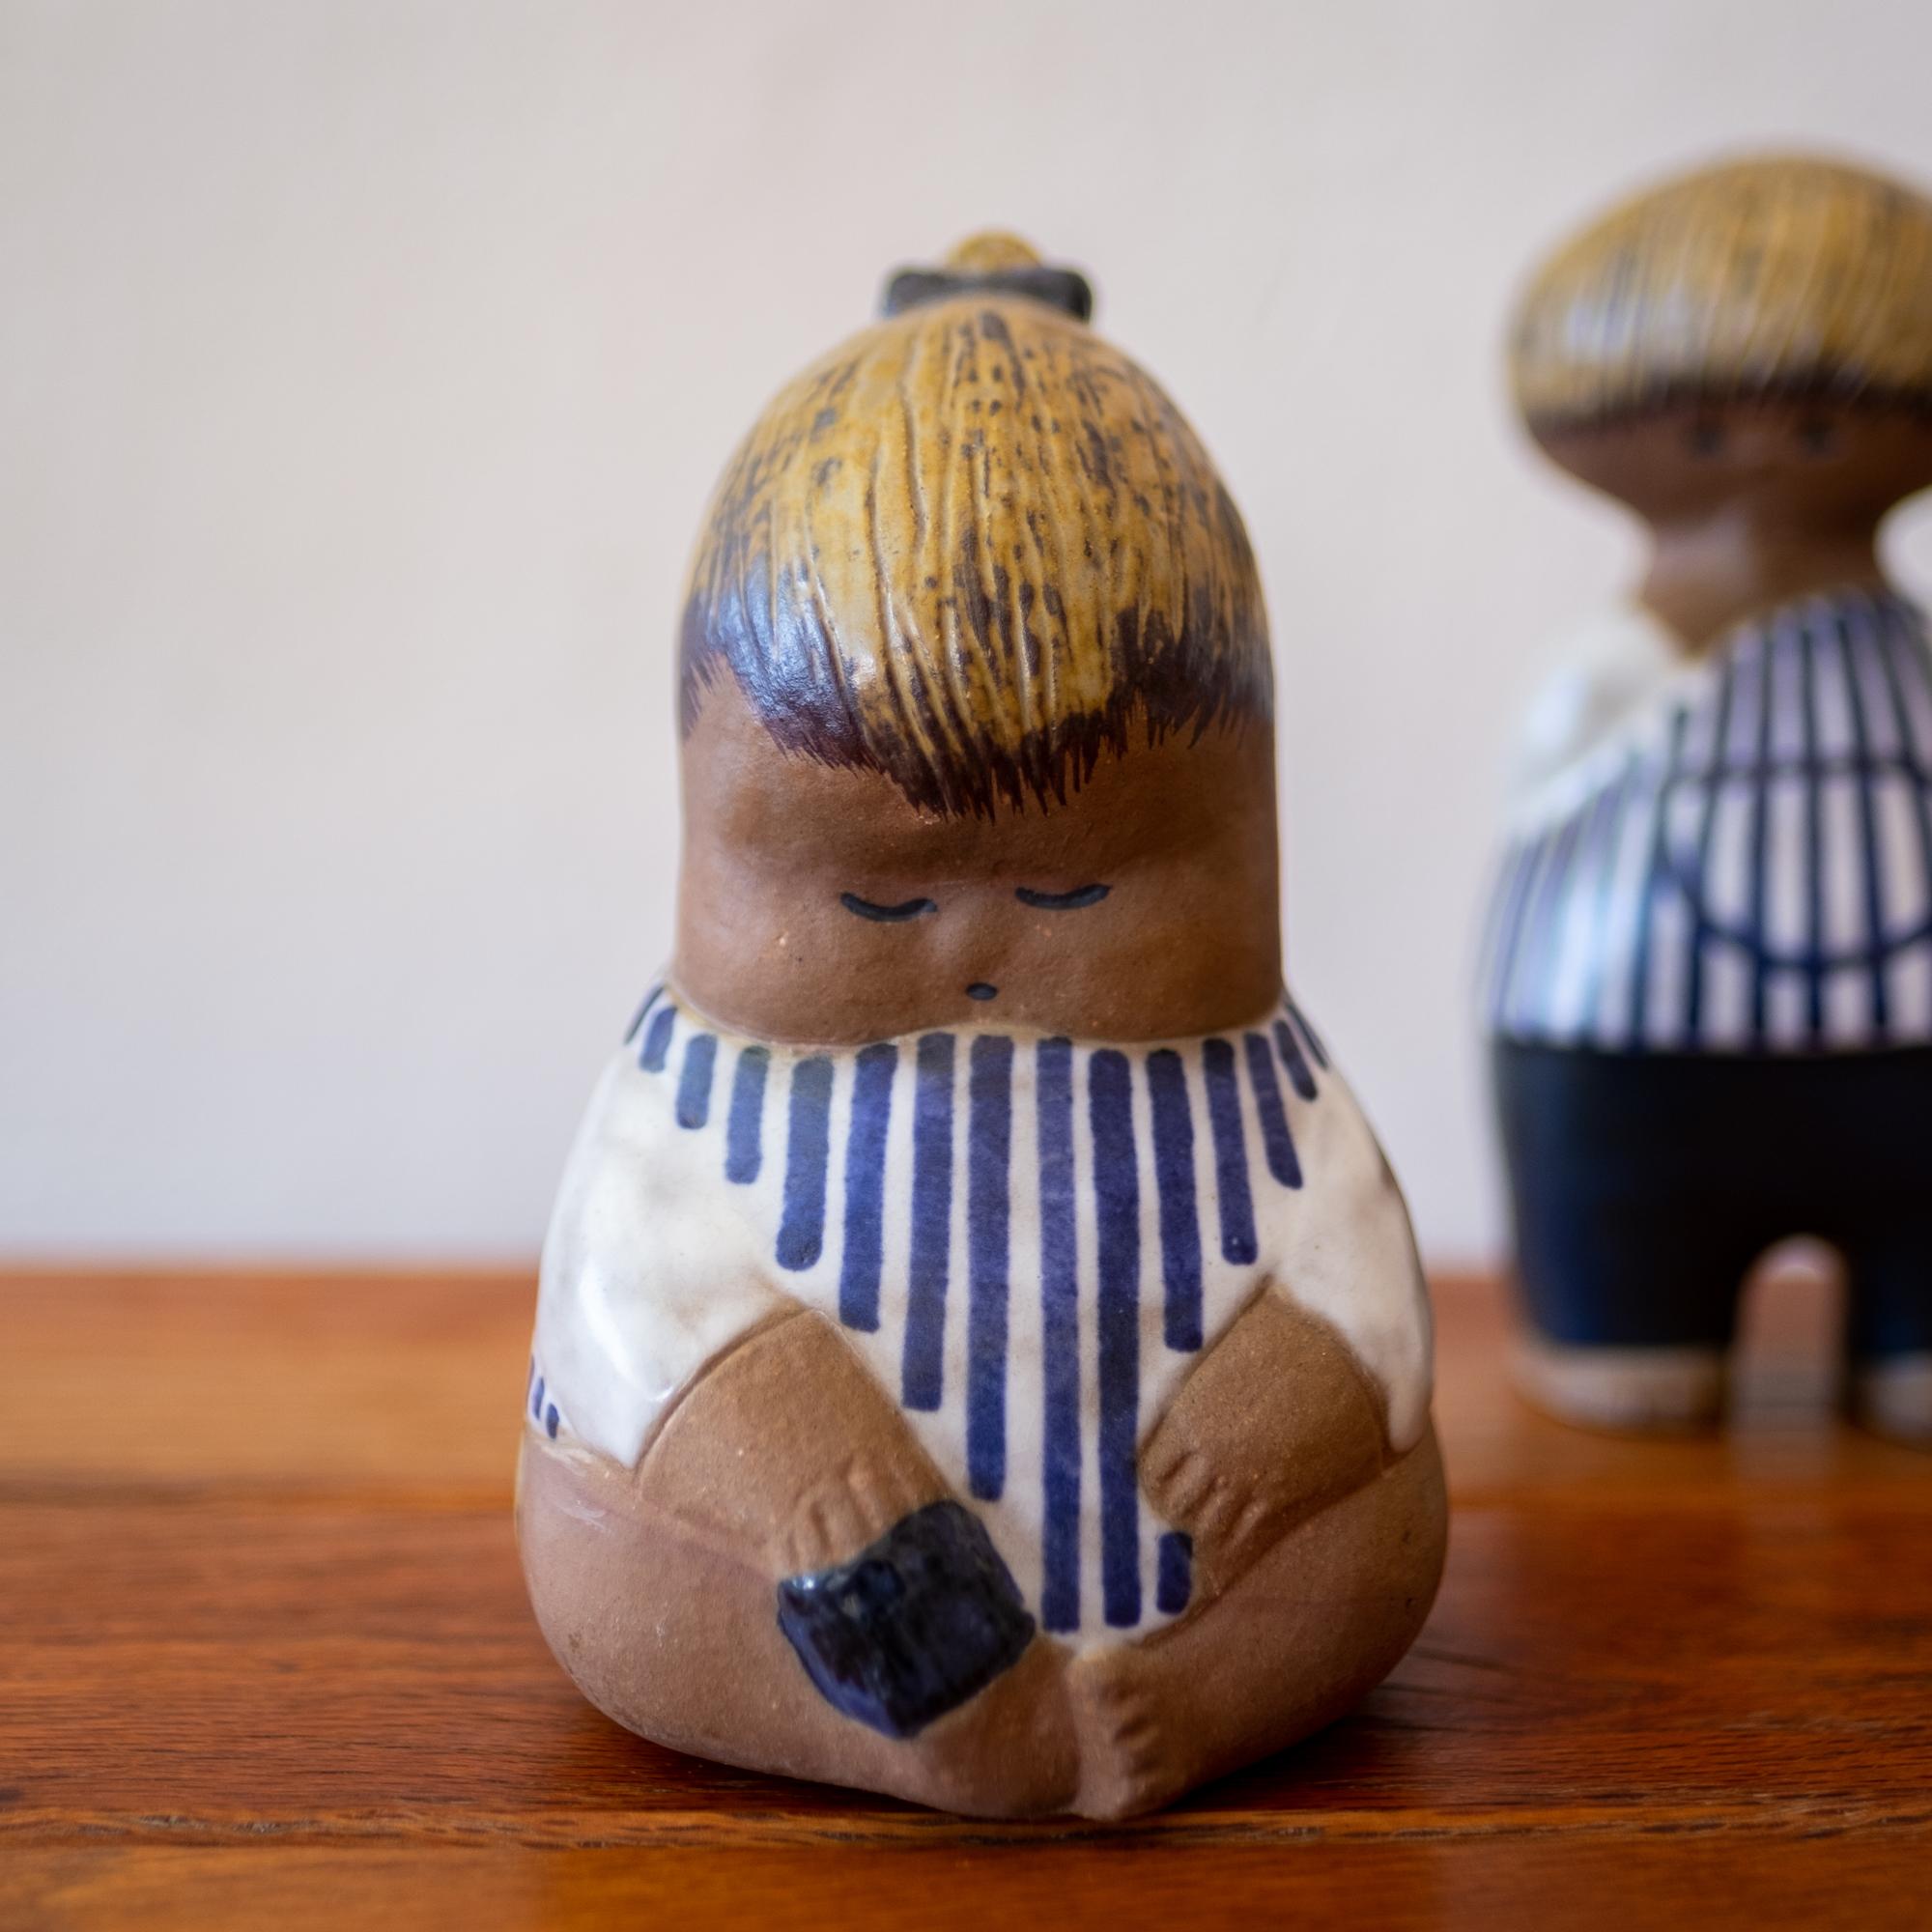 Mid-20th Century Lisa Larson Ceramic Figures in sags try dads cuter  as